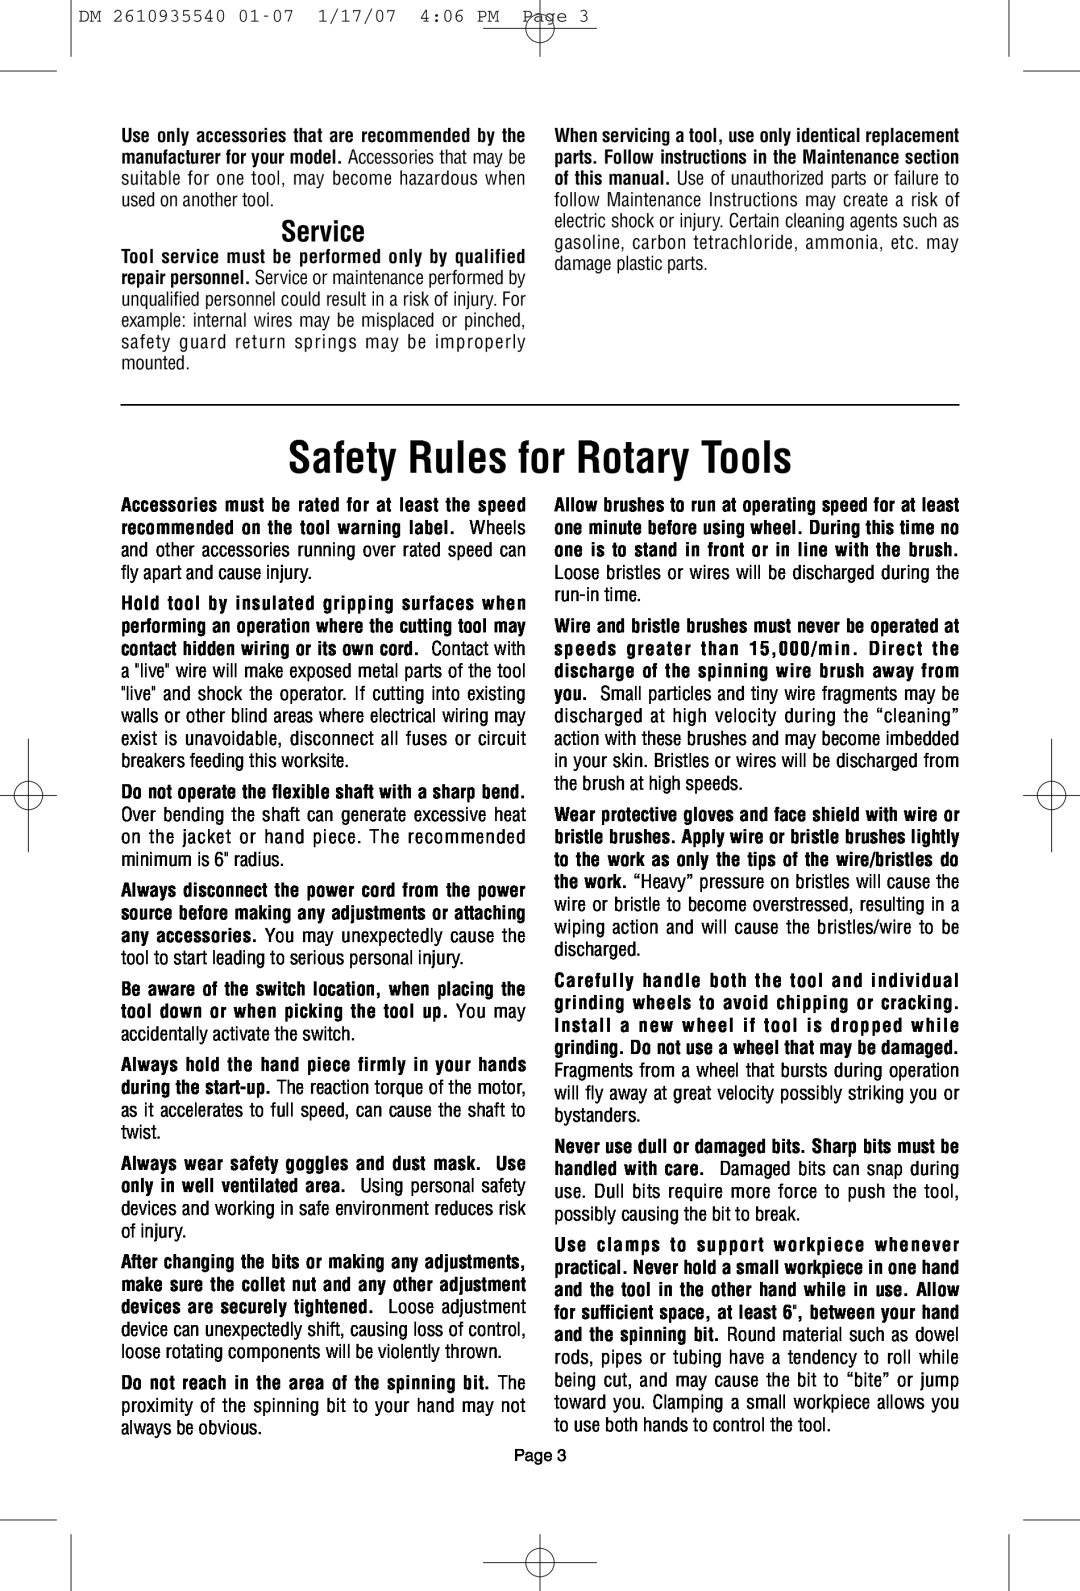 Dremel F013039519 owner manual Safety Rules for Rotary Tools, Service 